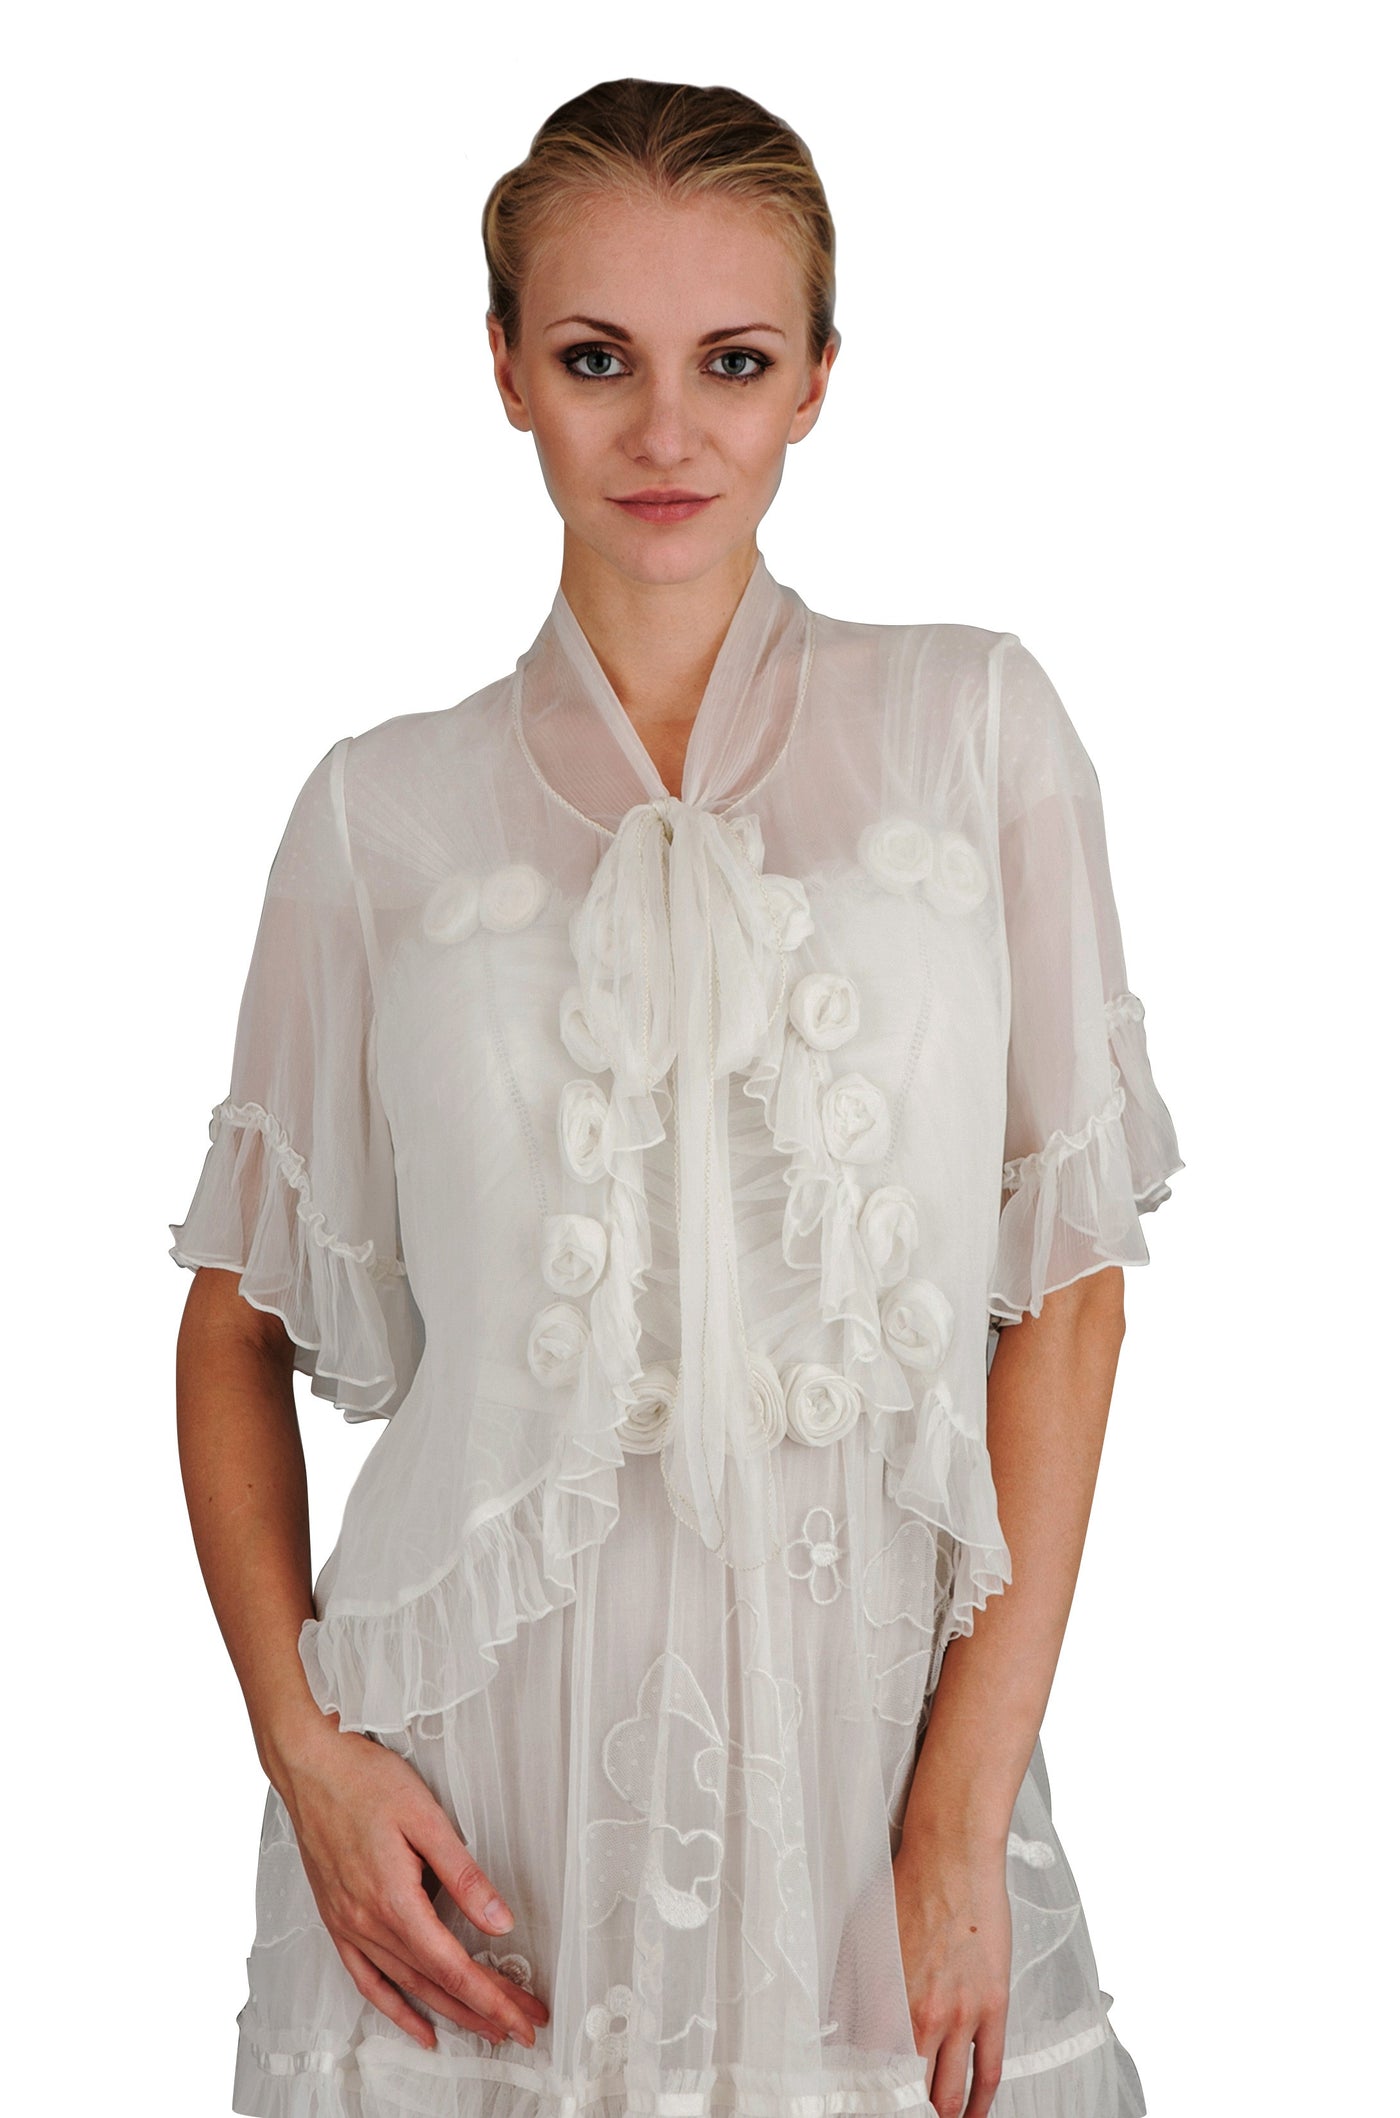 Vintage Style Wedding Top in Ivory by Nataya - SOLD OUT